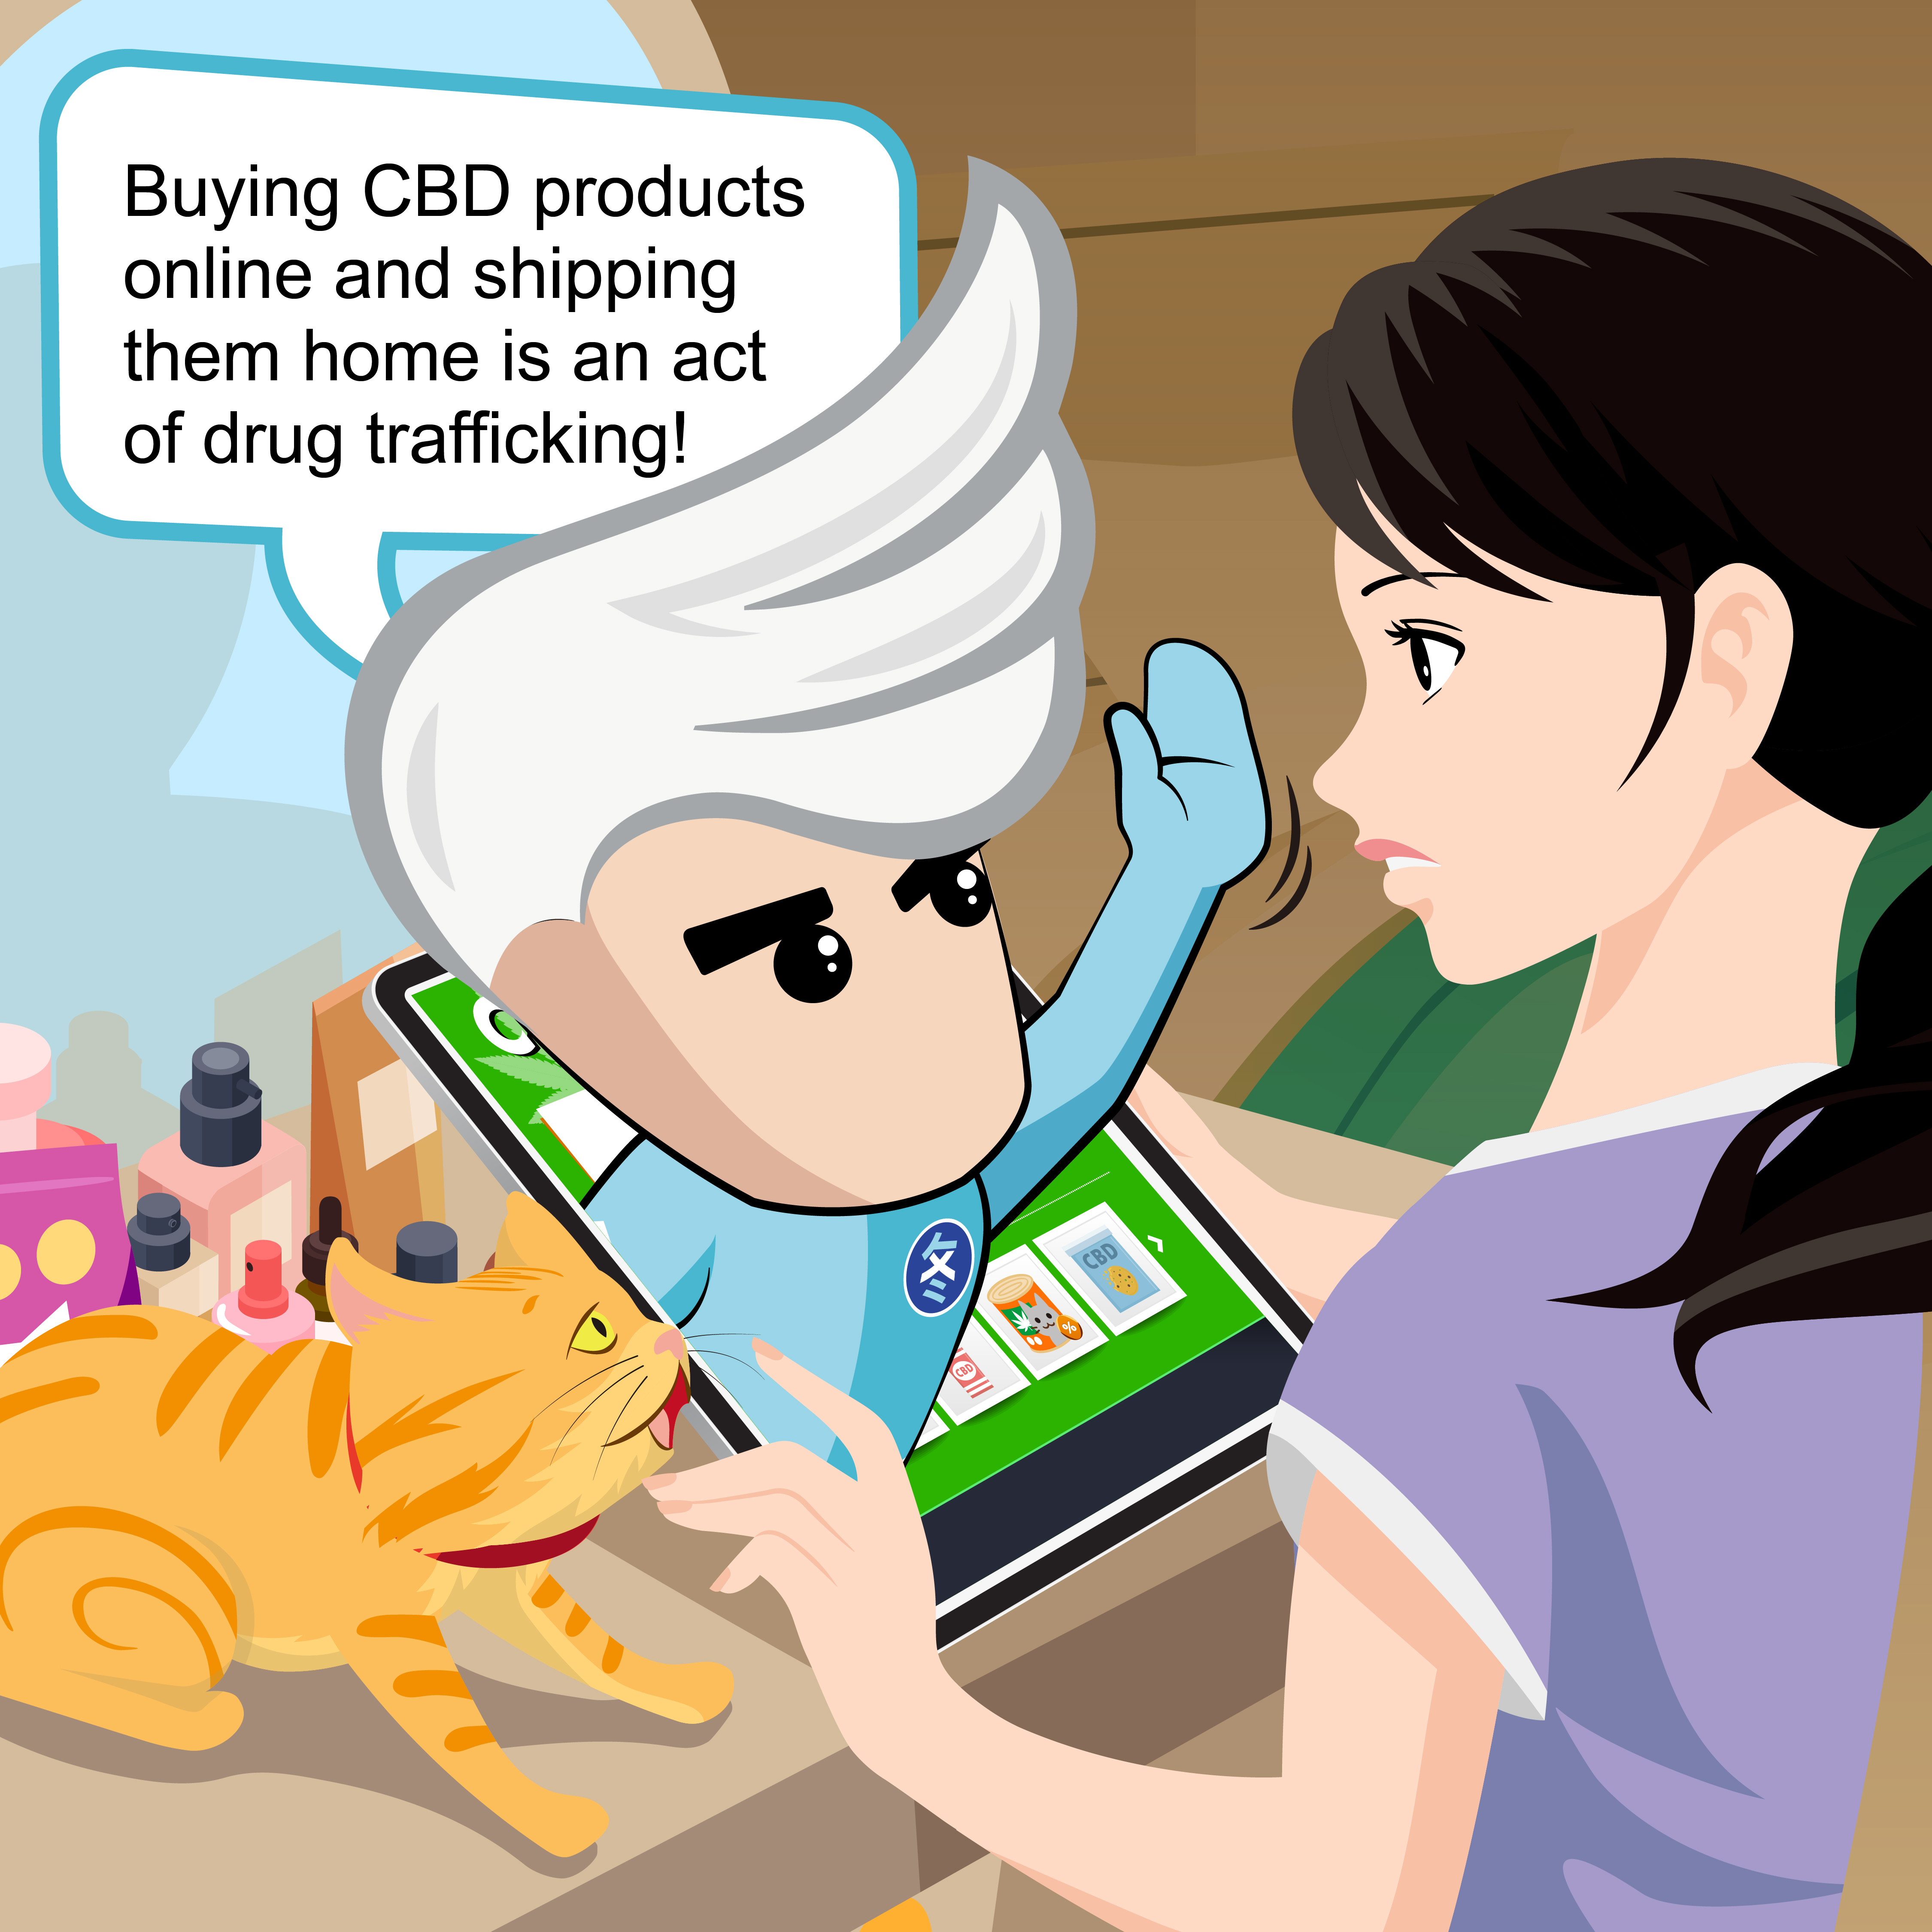 Buying CBD products online and shipping them home is an act of drug trafficking!